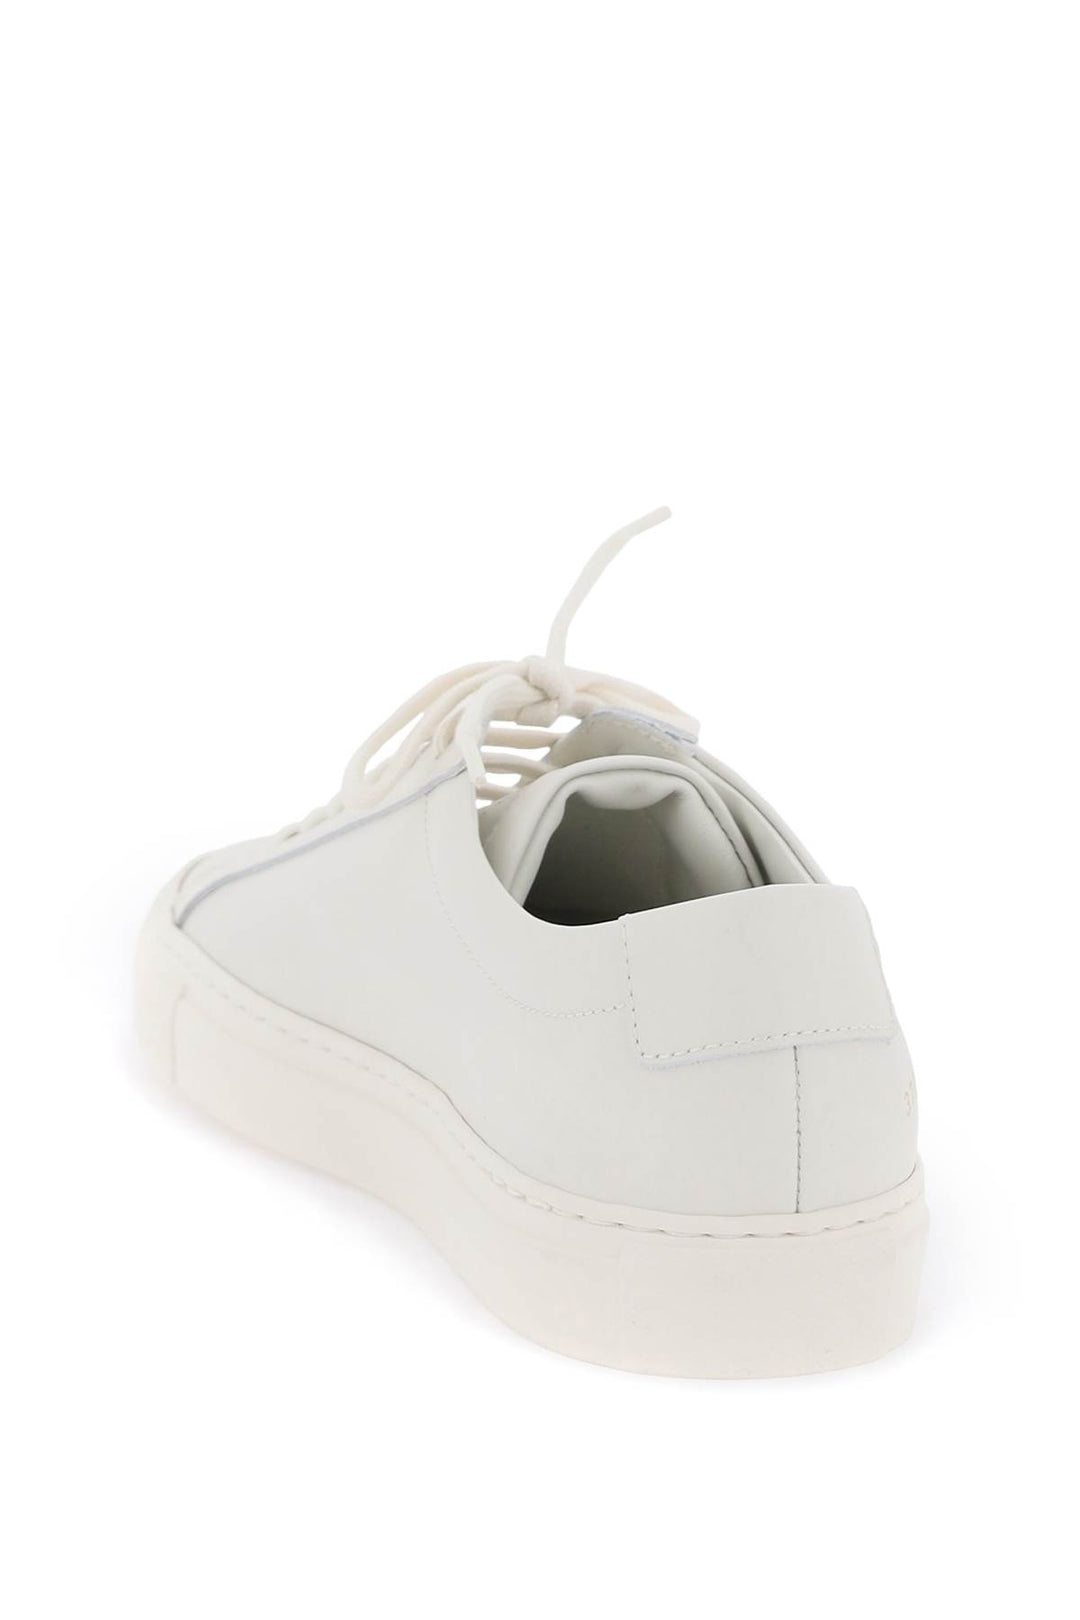 Common Projects Original Achilles Leather Sneakers   Bianco